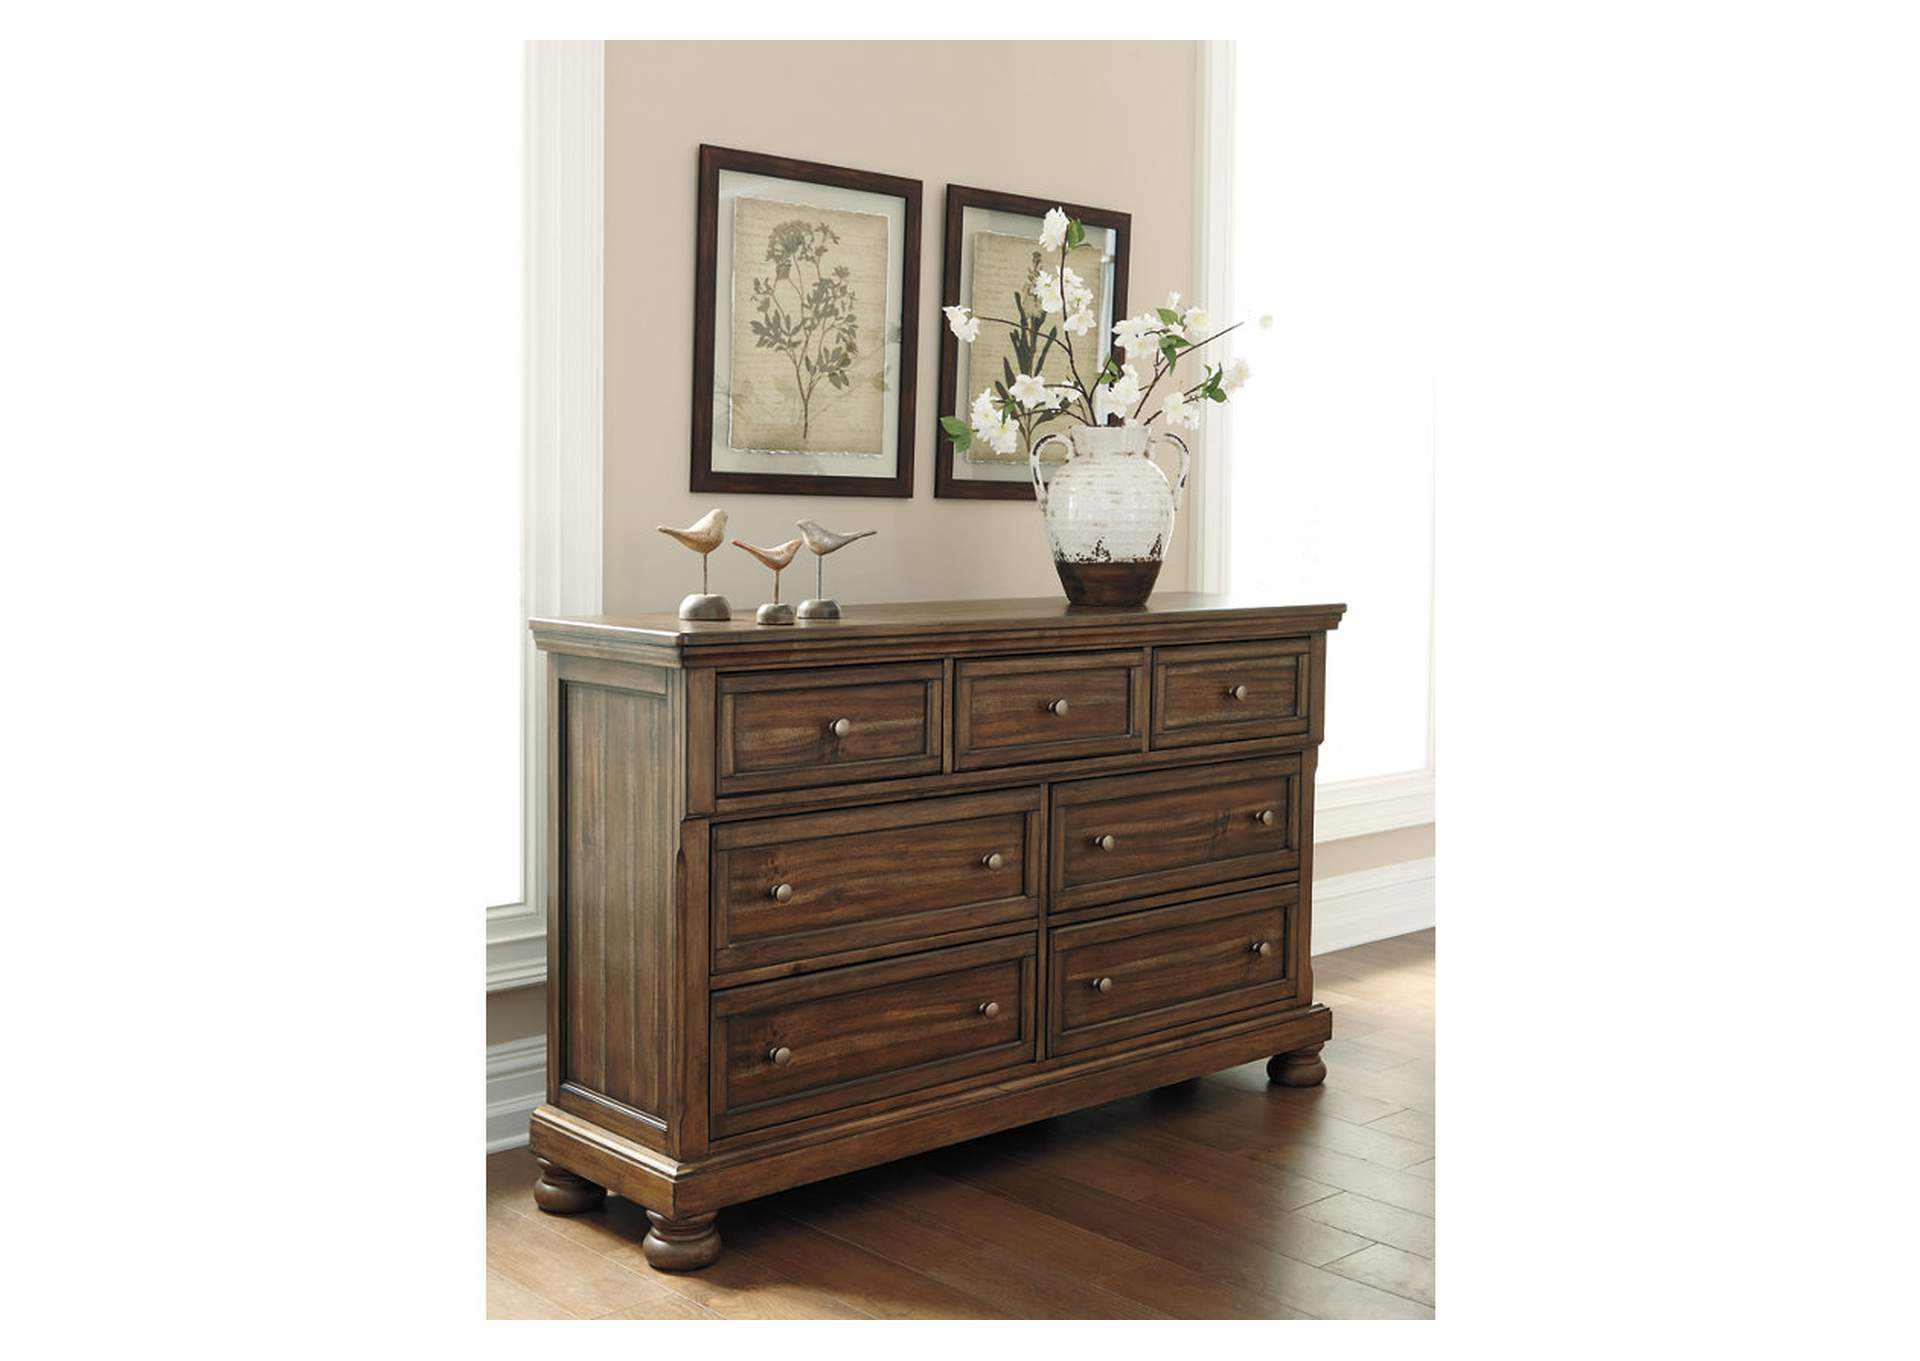 Flynnter King Panel Bed with 2 Storage Drawers with Dresser,Signature Design By Ashley